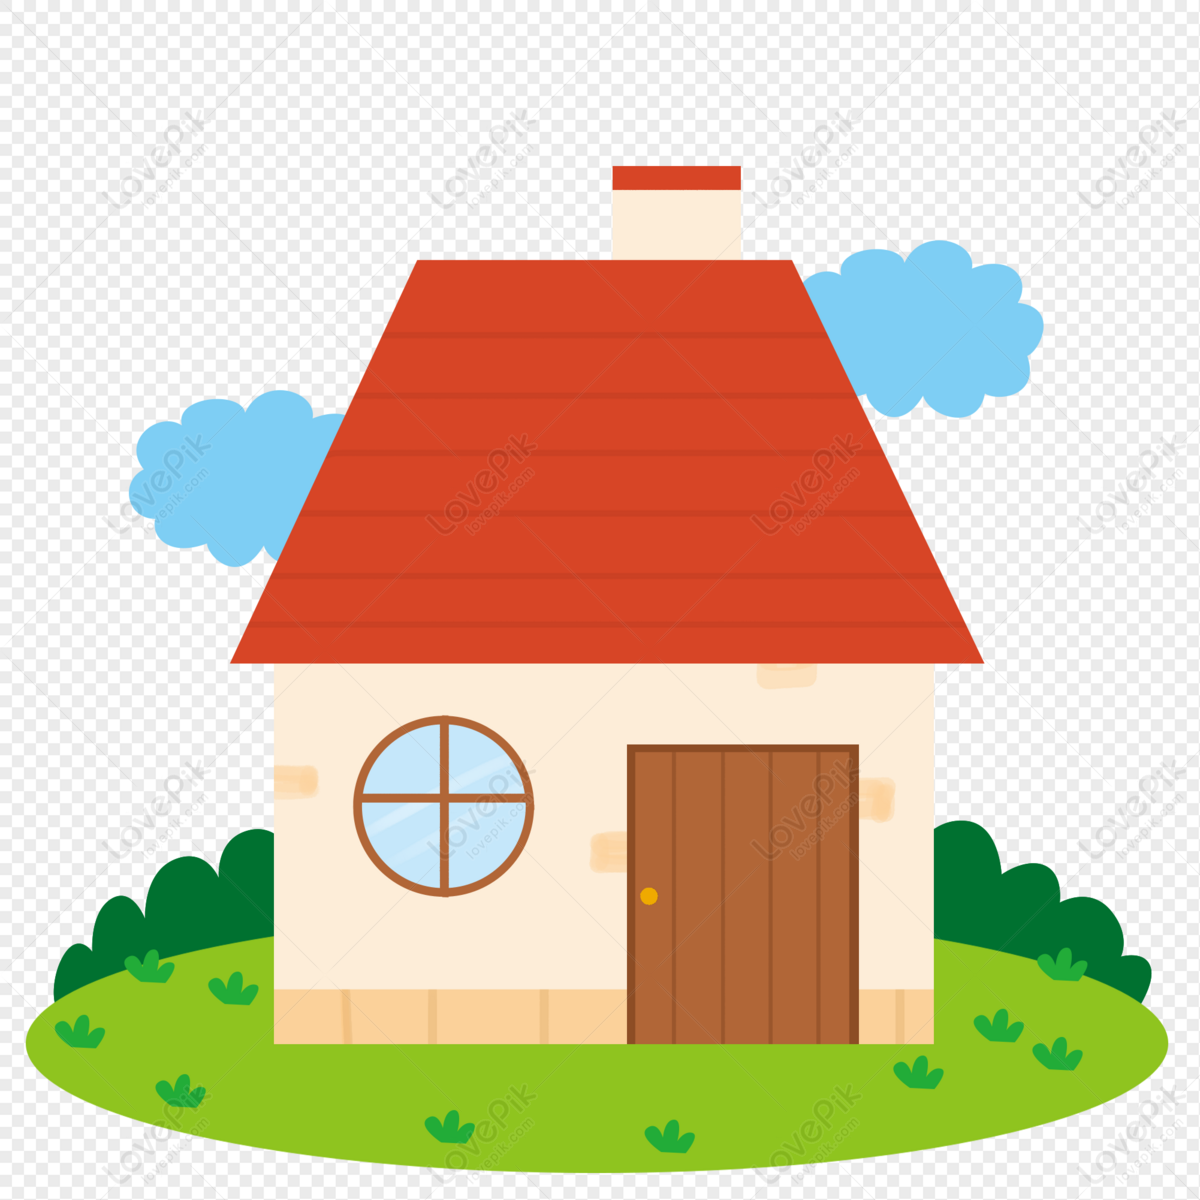 House PNG Free Download And Clipart Image For Free Download - Lovepik |  401292323